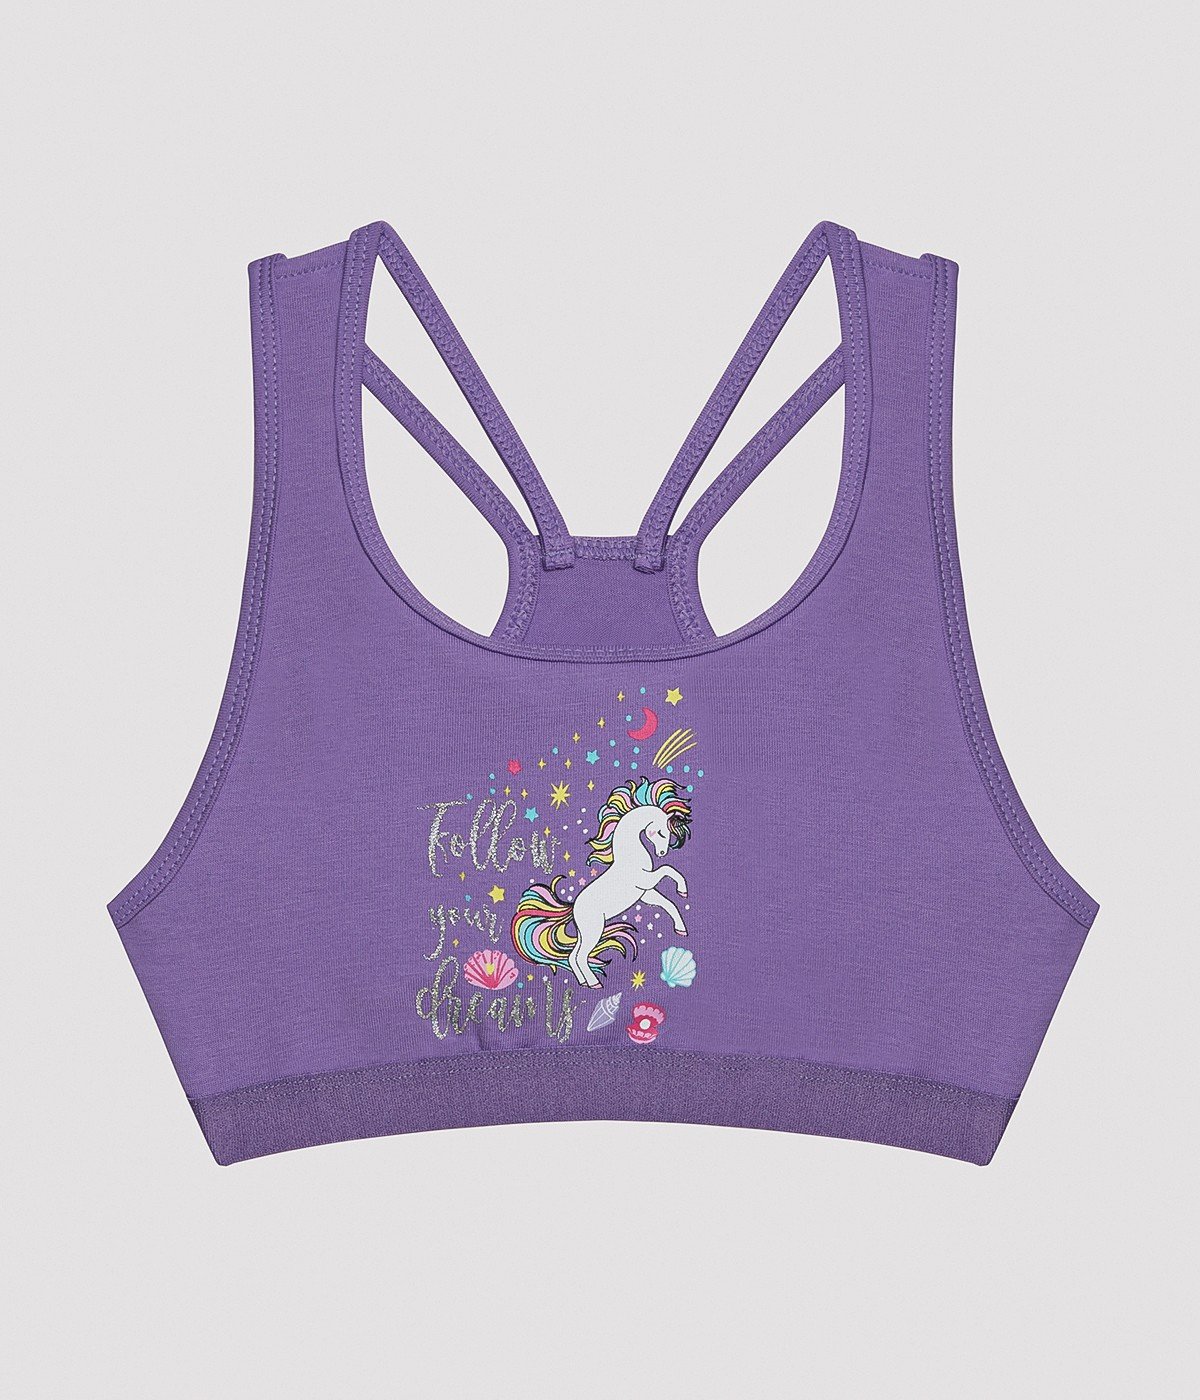 Girls Colorful Unicorn Detailed 2in1 Sports Top